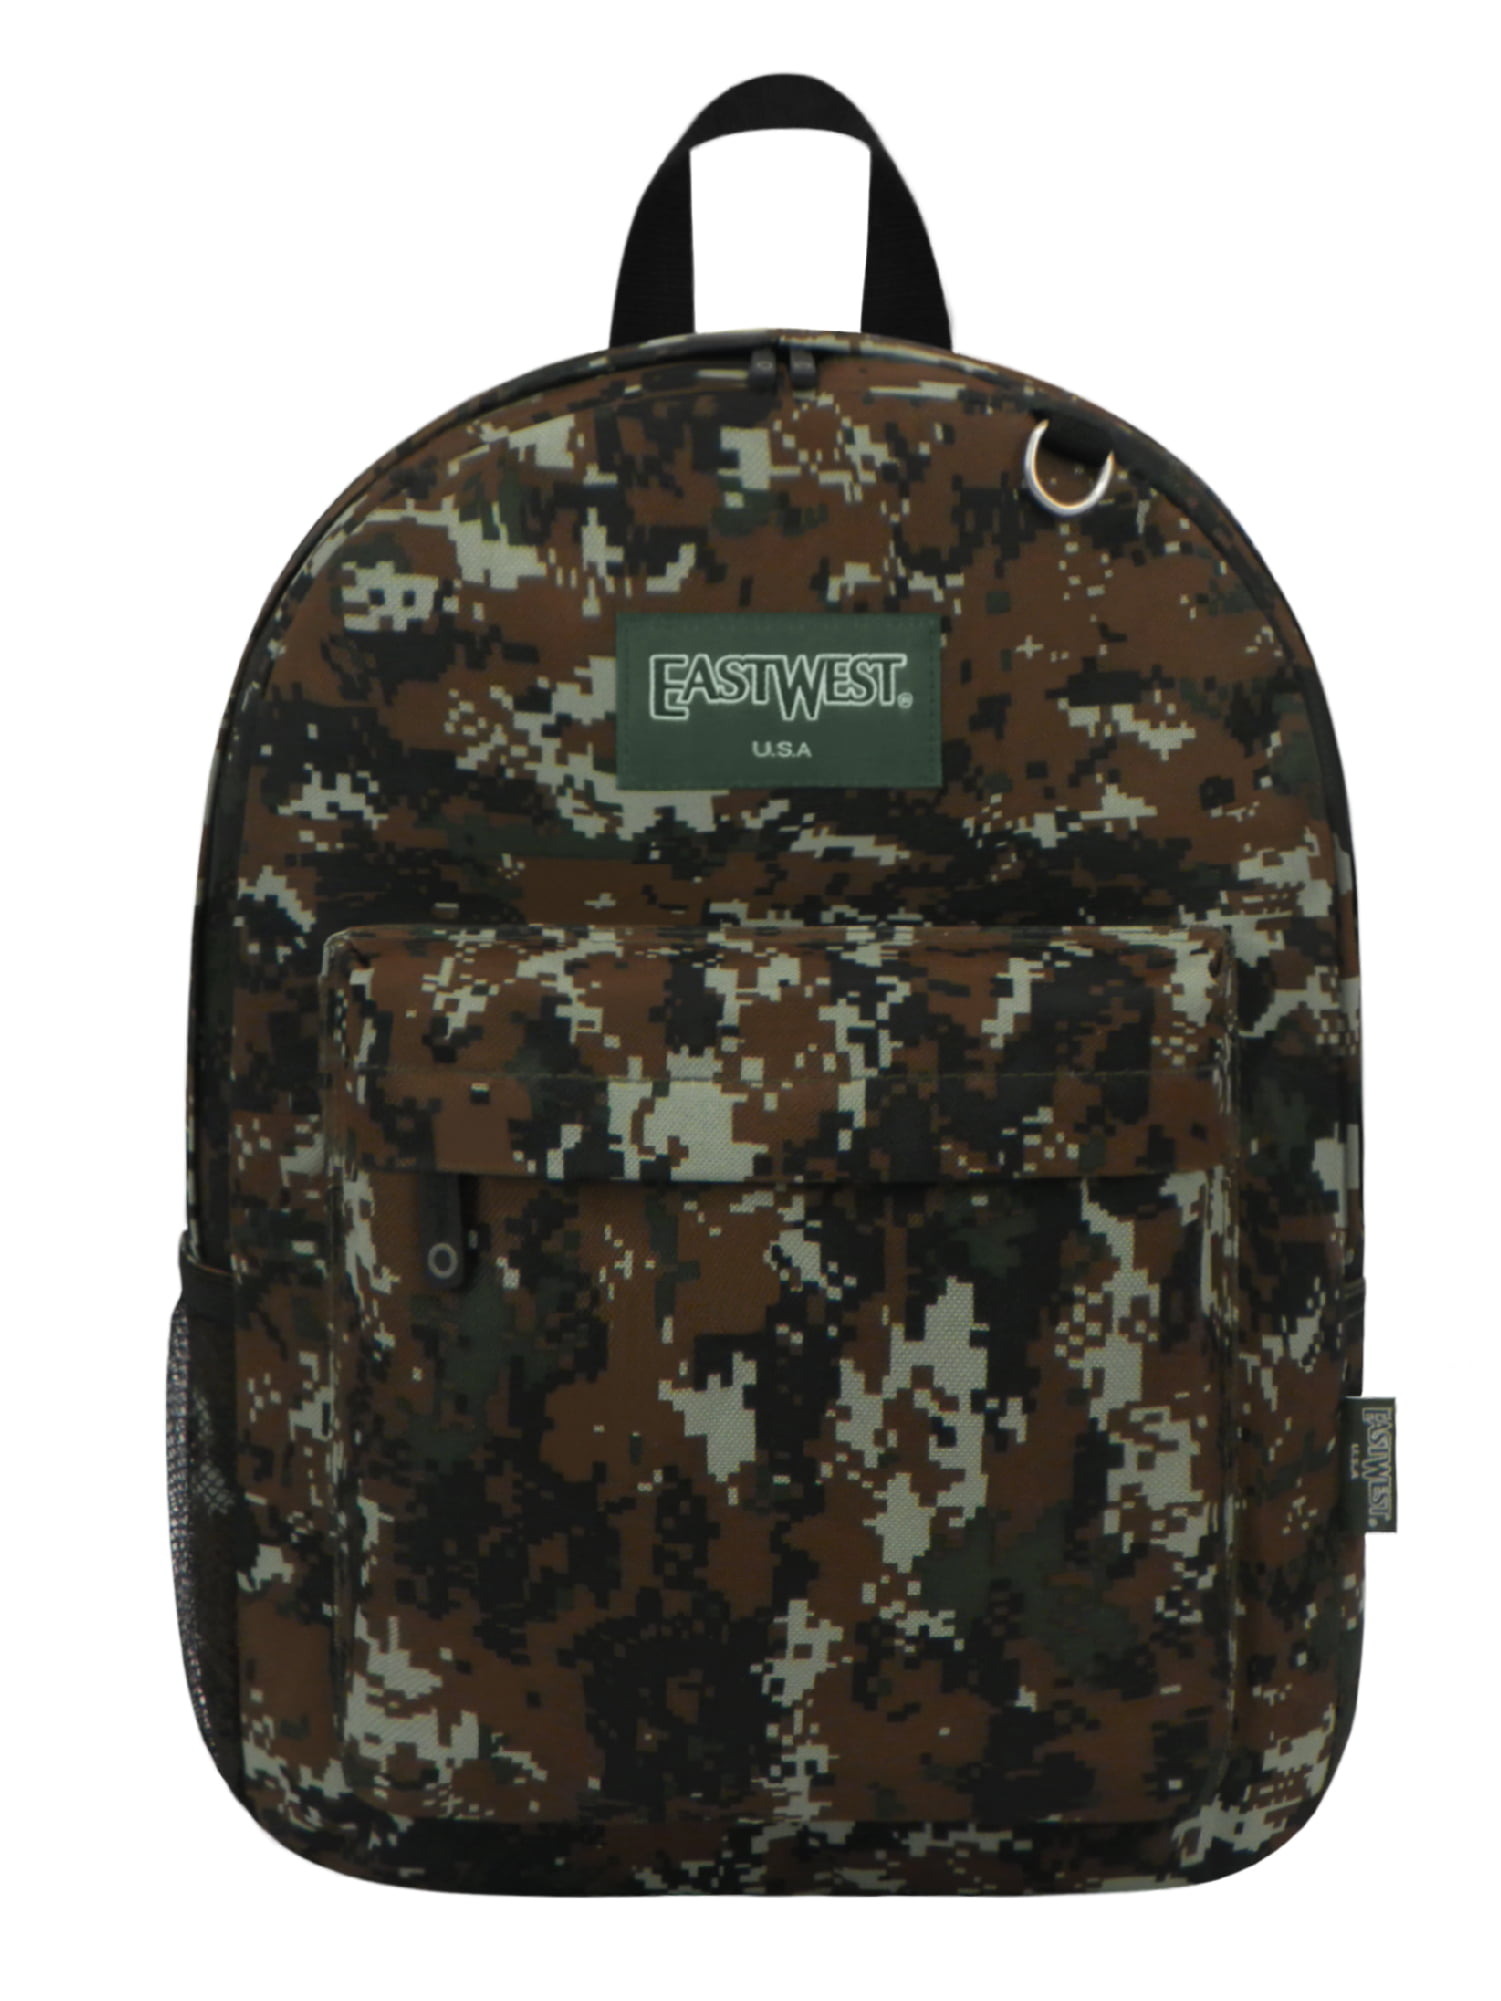 Details about   EAST WEST,USA Simple Backpack Mint LRG ELECTRONIC PKT,LIFETIME,BUY 1GET 1 50%ff 